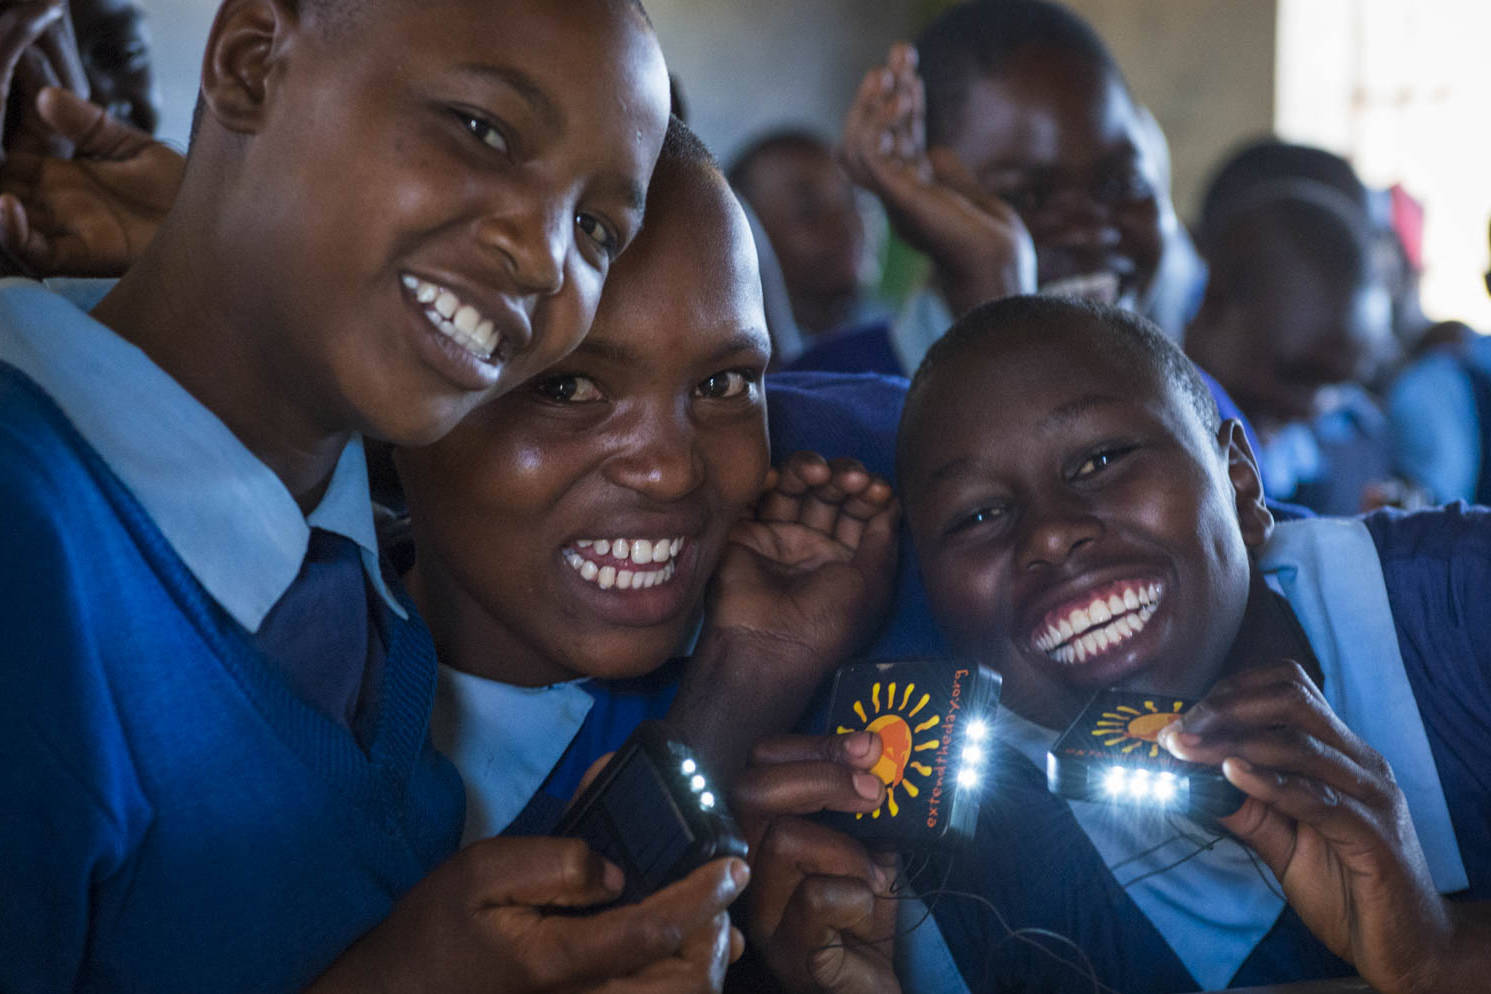 Through their partnership with Dandelion Africa, Extend the Day supplied solar lights to 9,000 children in Kenya. Photo courtesy of Extend the Day